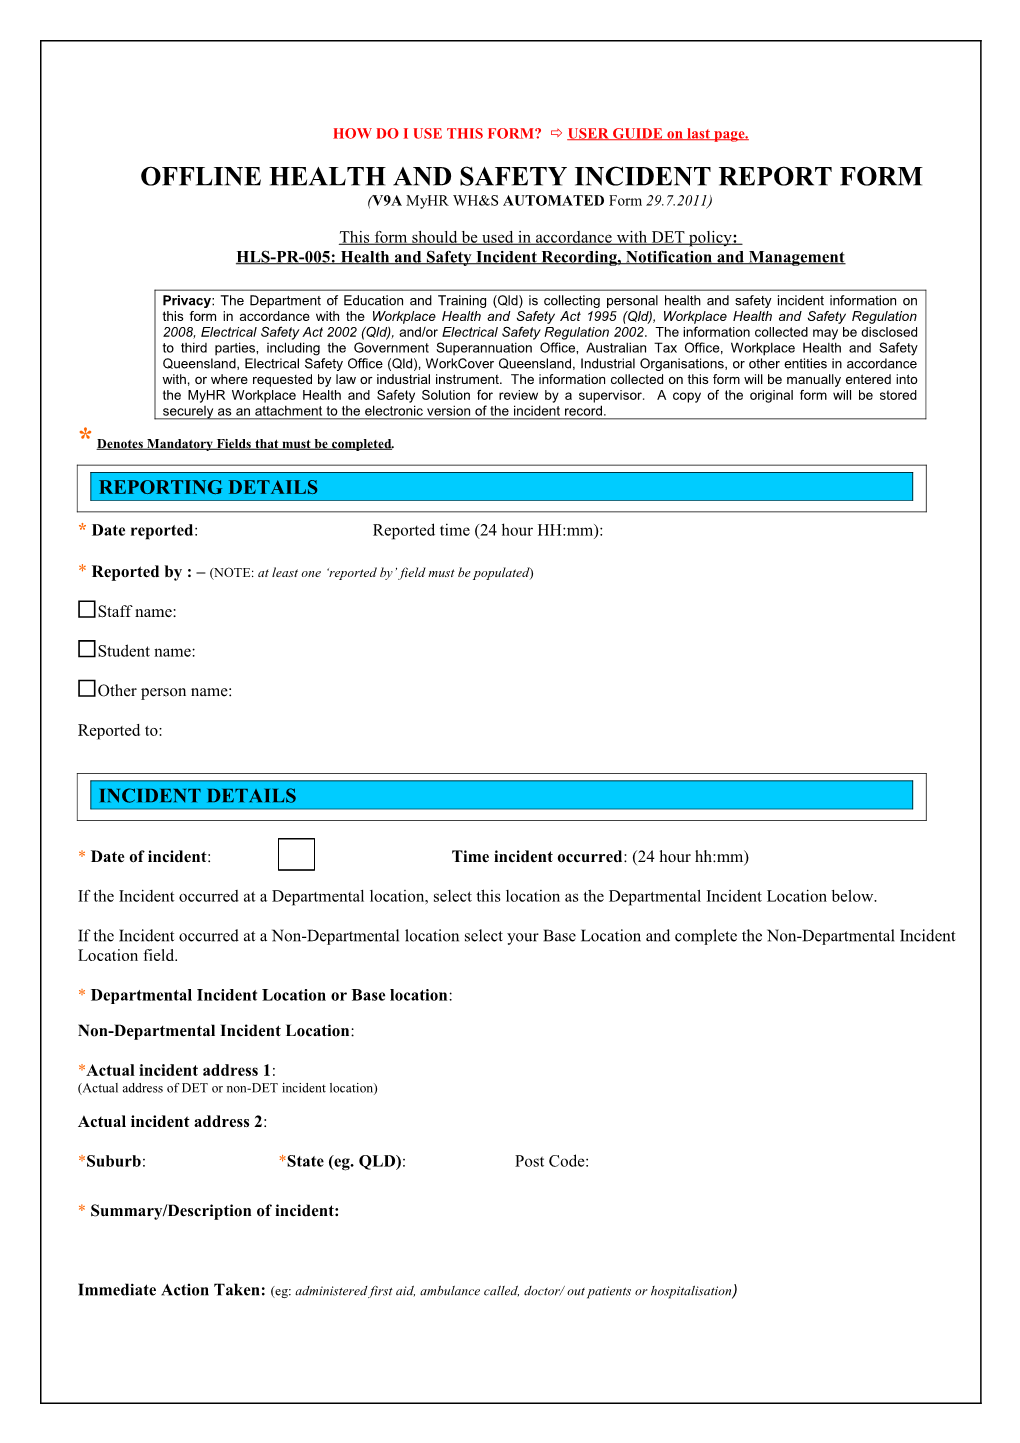 2014 Form 16 - Incident Report Form. Offline Health and Safety Incident Report Form